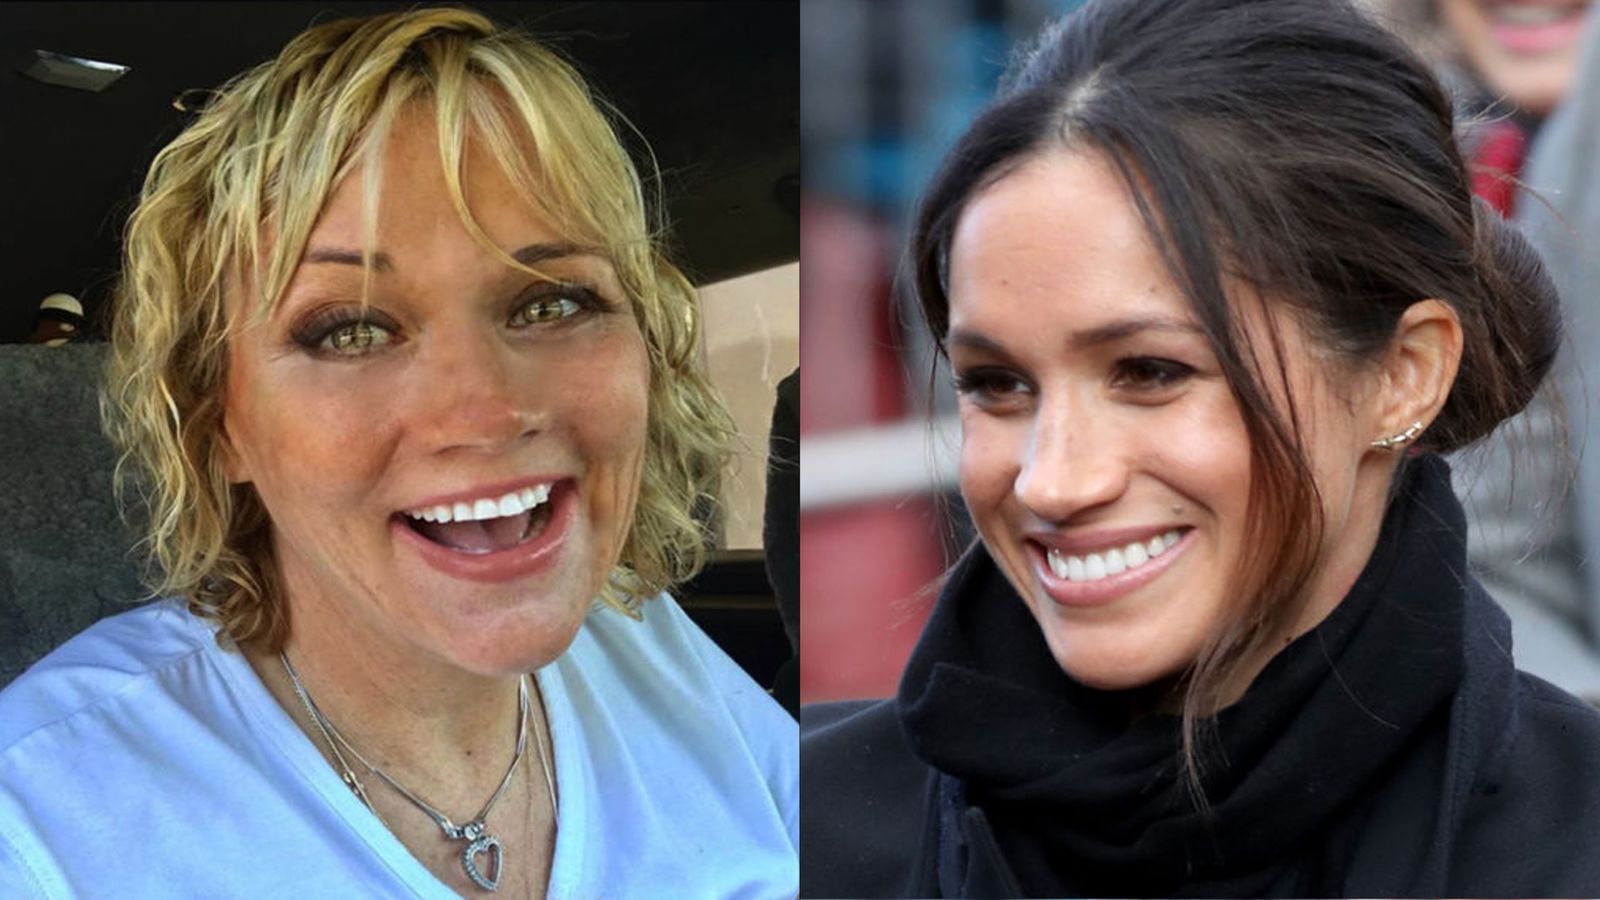 Meghan Markle's half-sister questions her motives for her humanitarian work | World News | Sky News